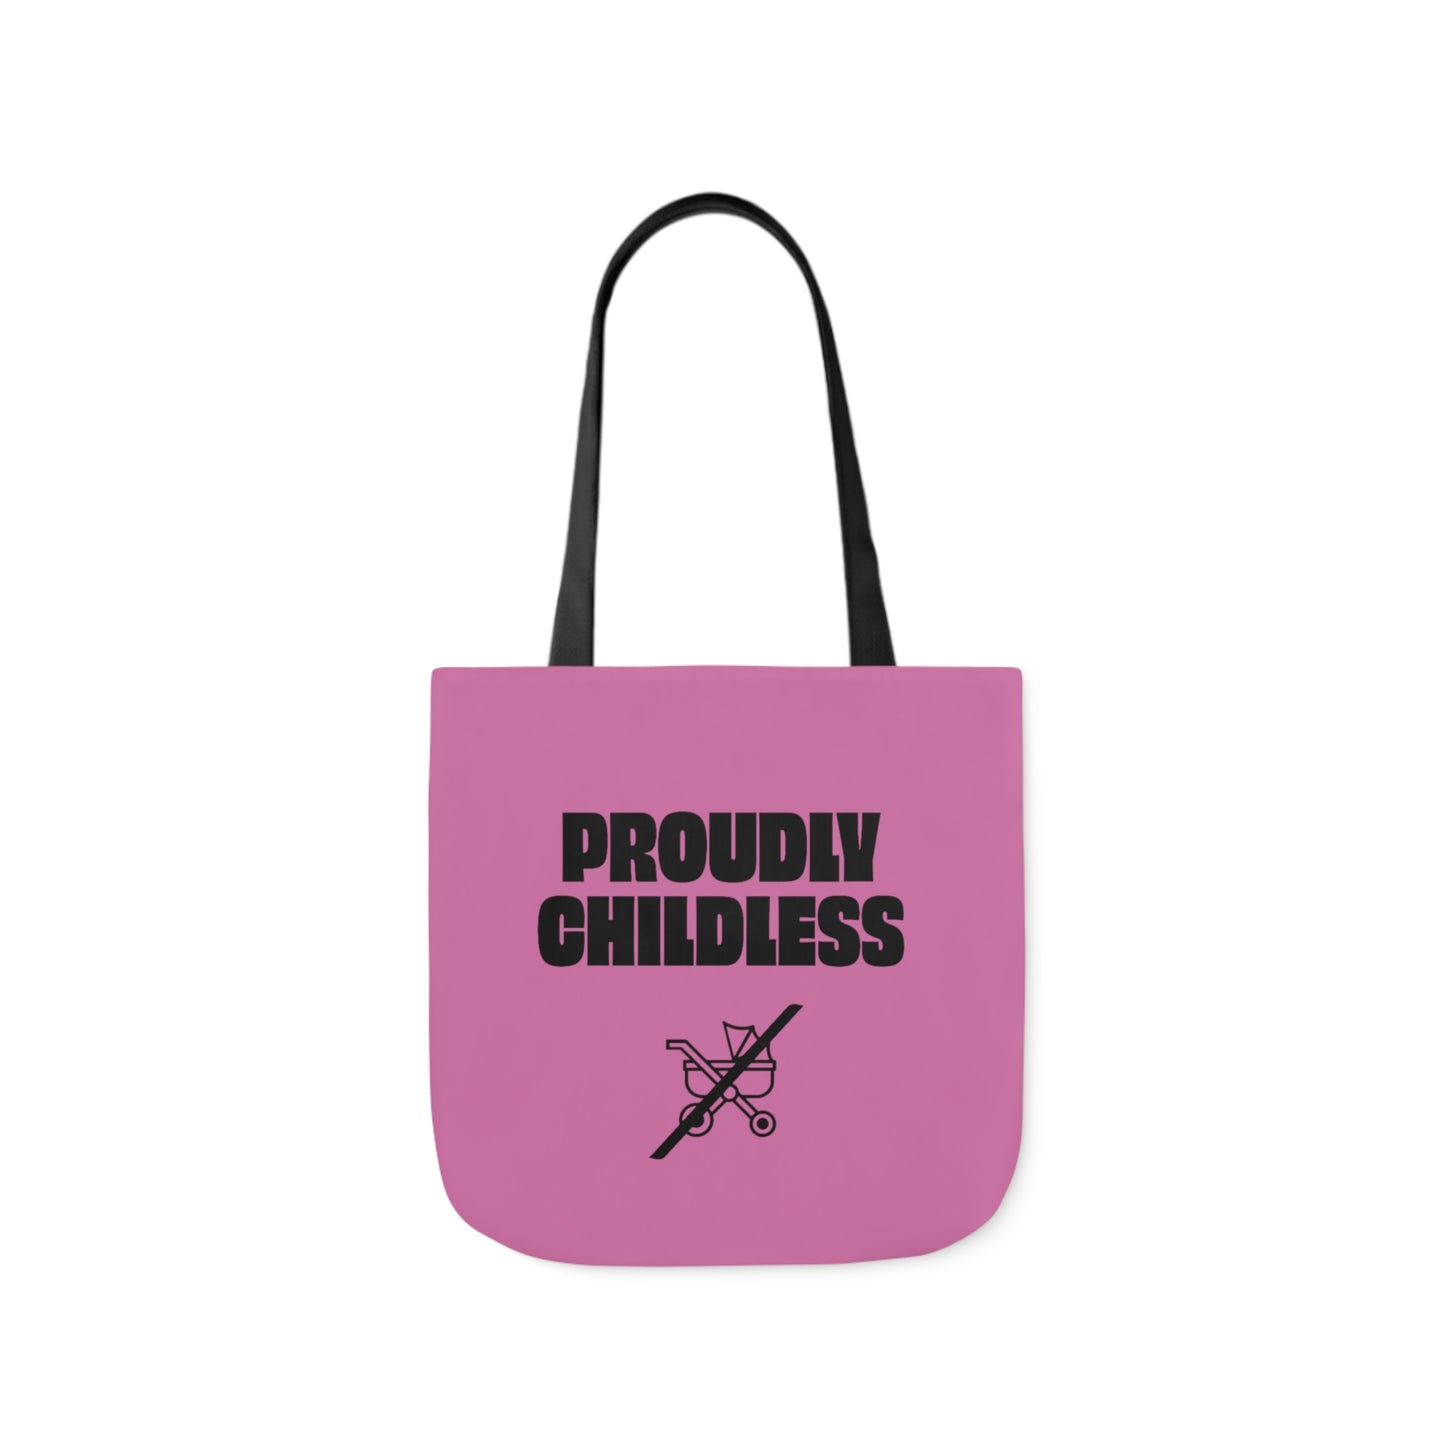 Proudly Childless Tote Bag